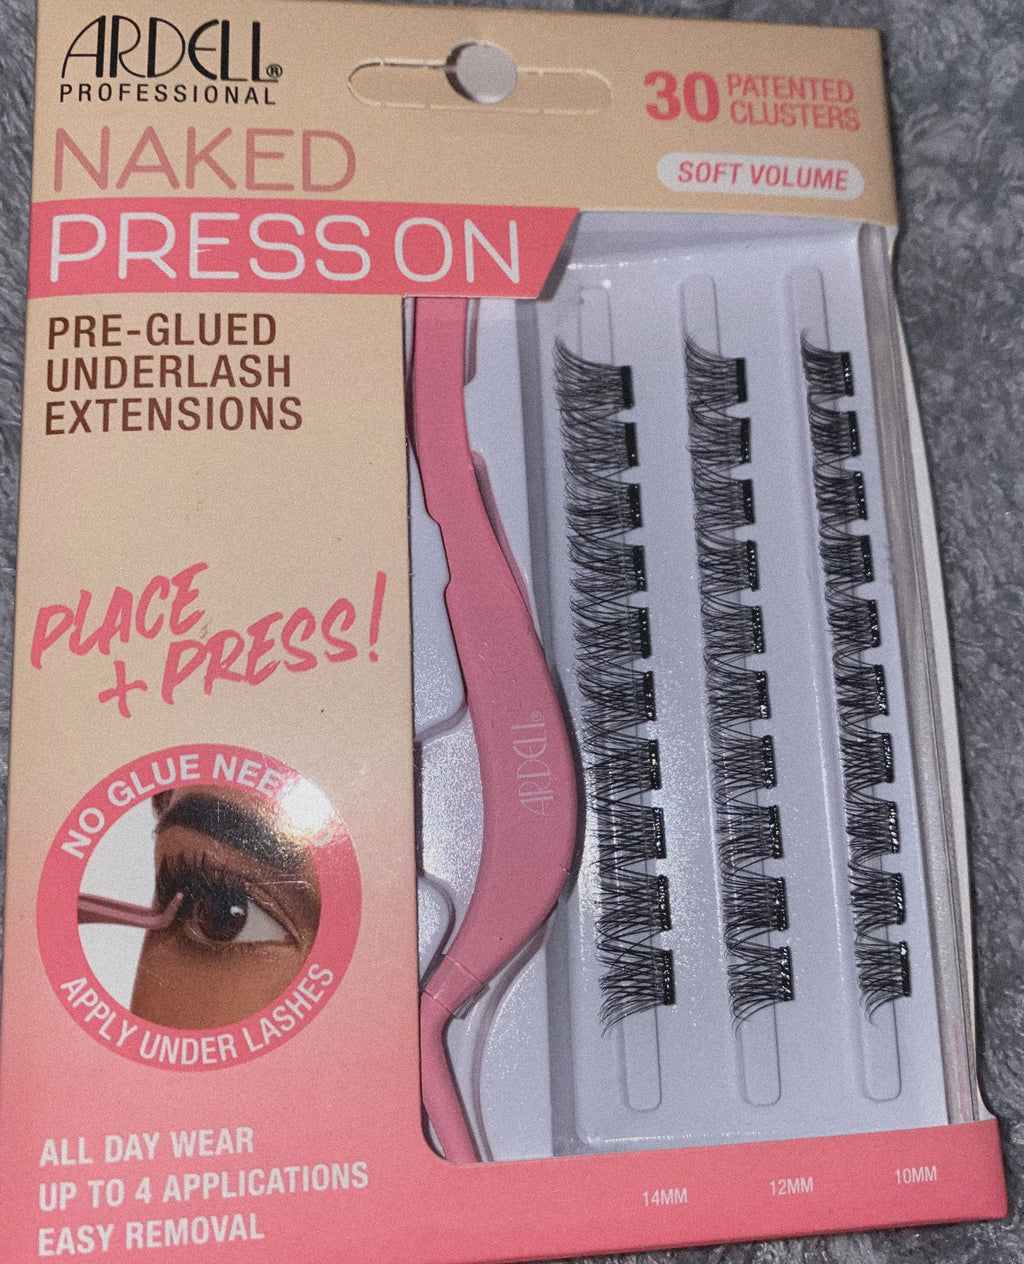 Ardell Naked Press On Lightweight Pre-glued Lashes